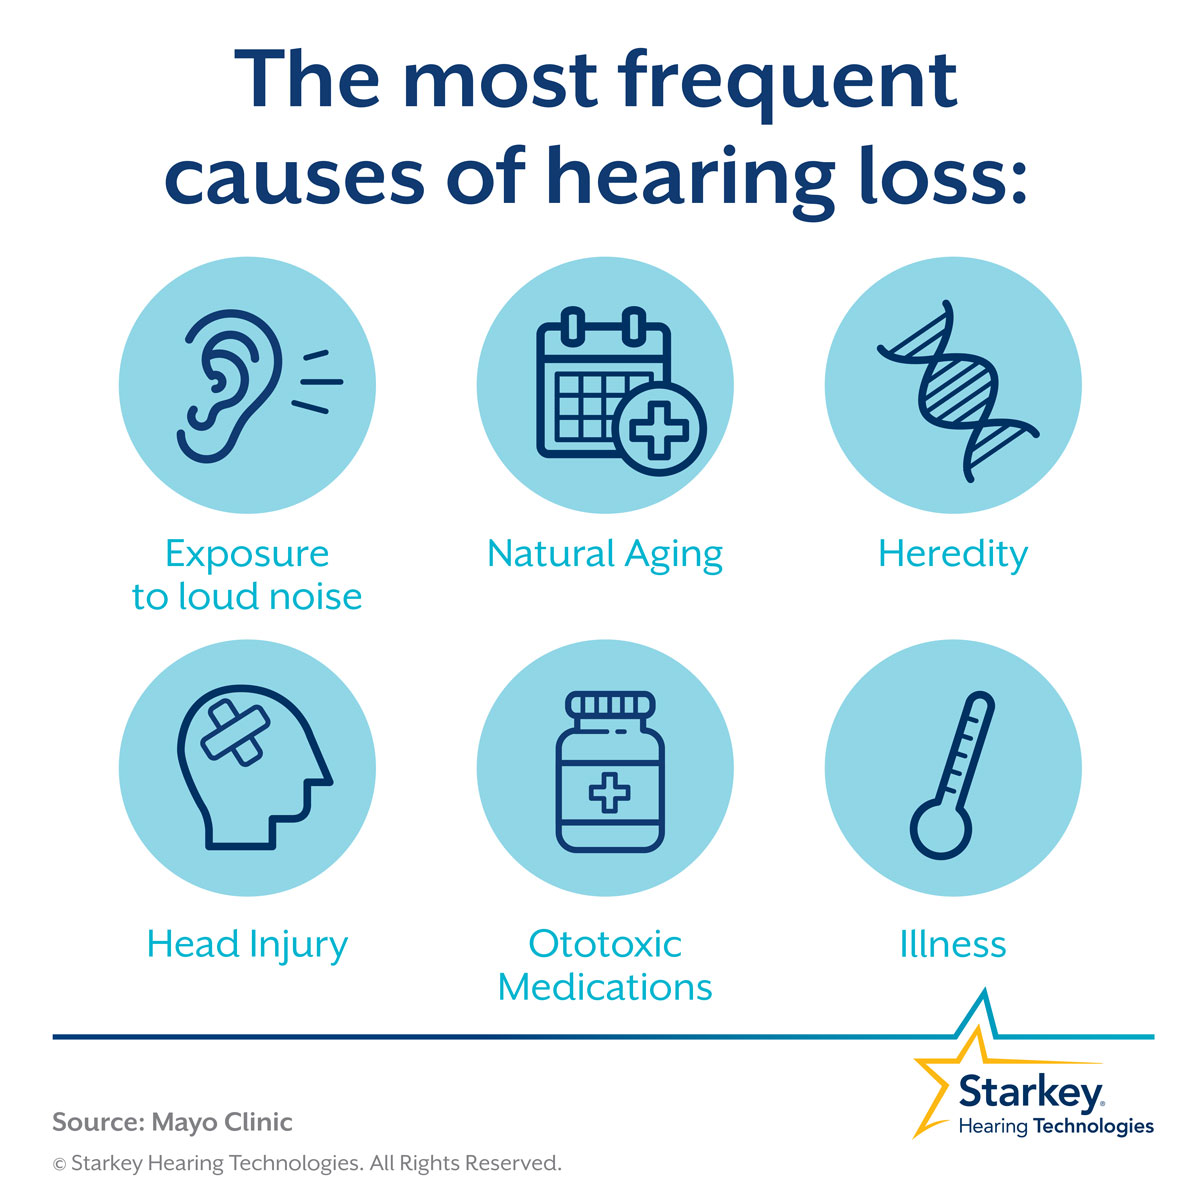 The most frequent causes of hearing loss